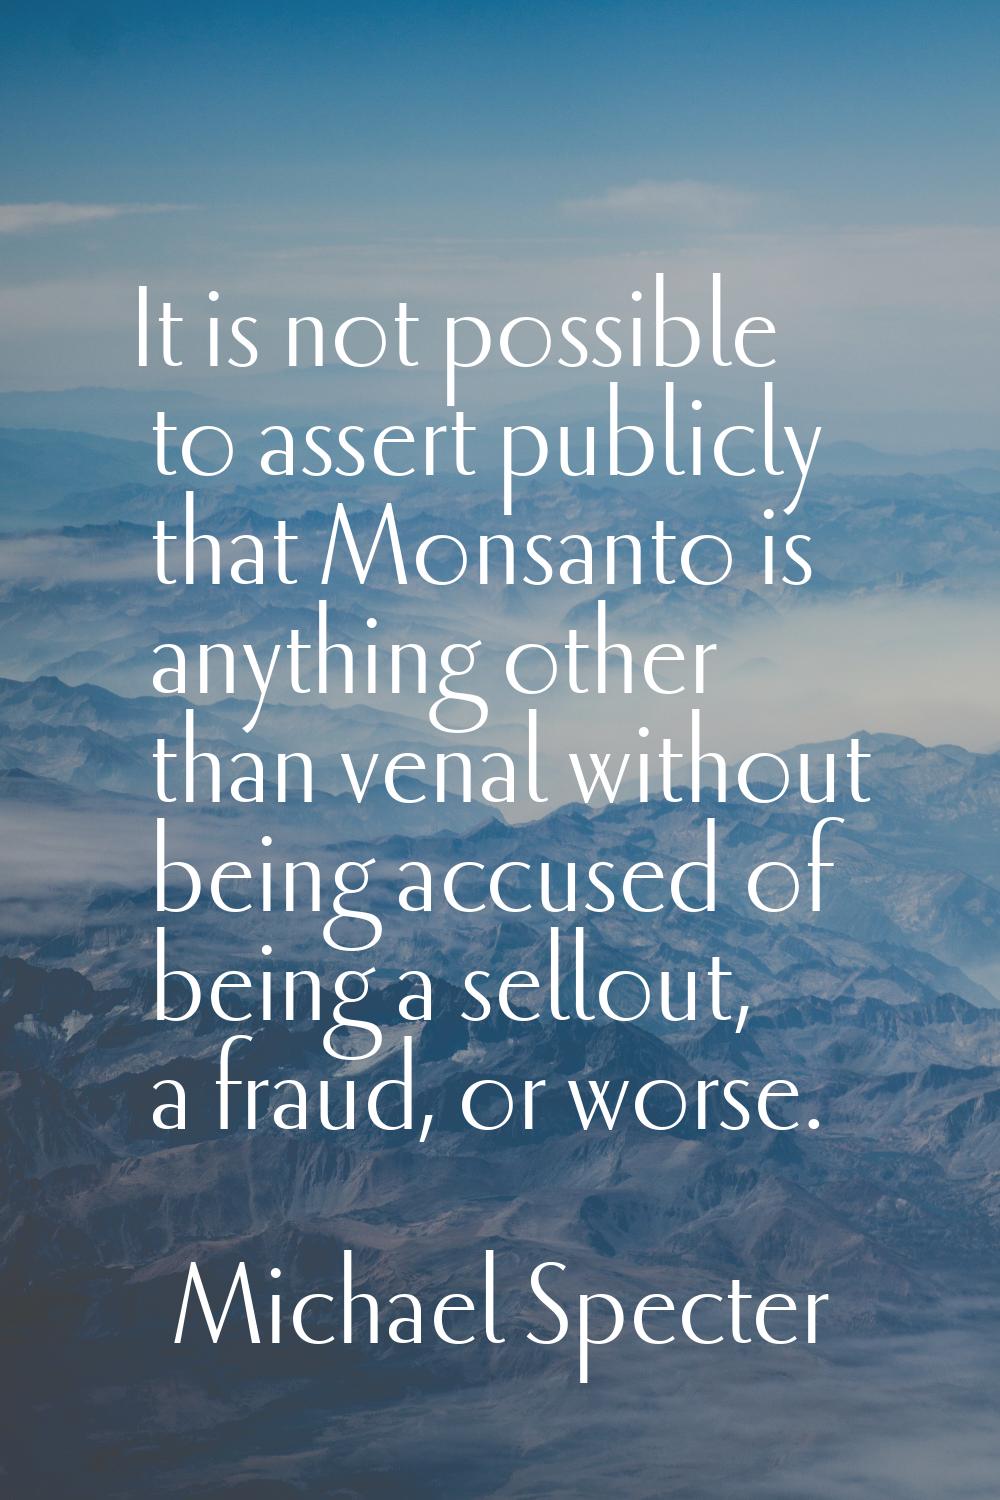 It is not possible to assert publicly that Monsanto is anything other than venal without being accu